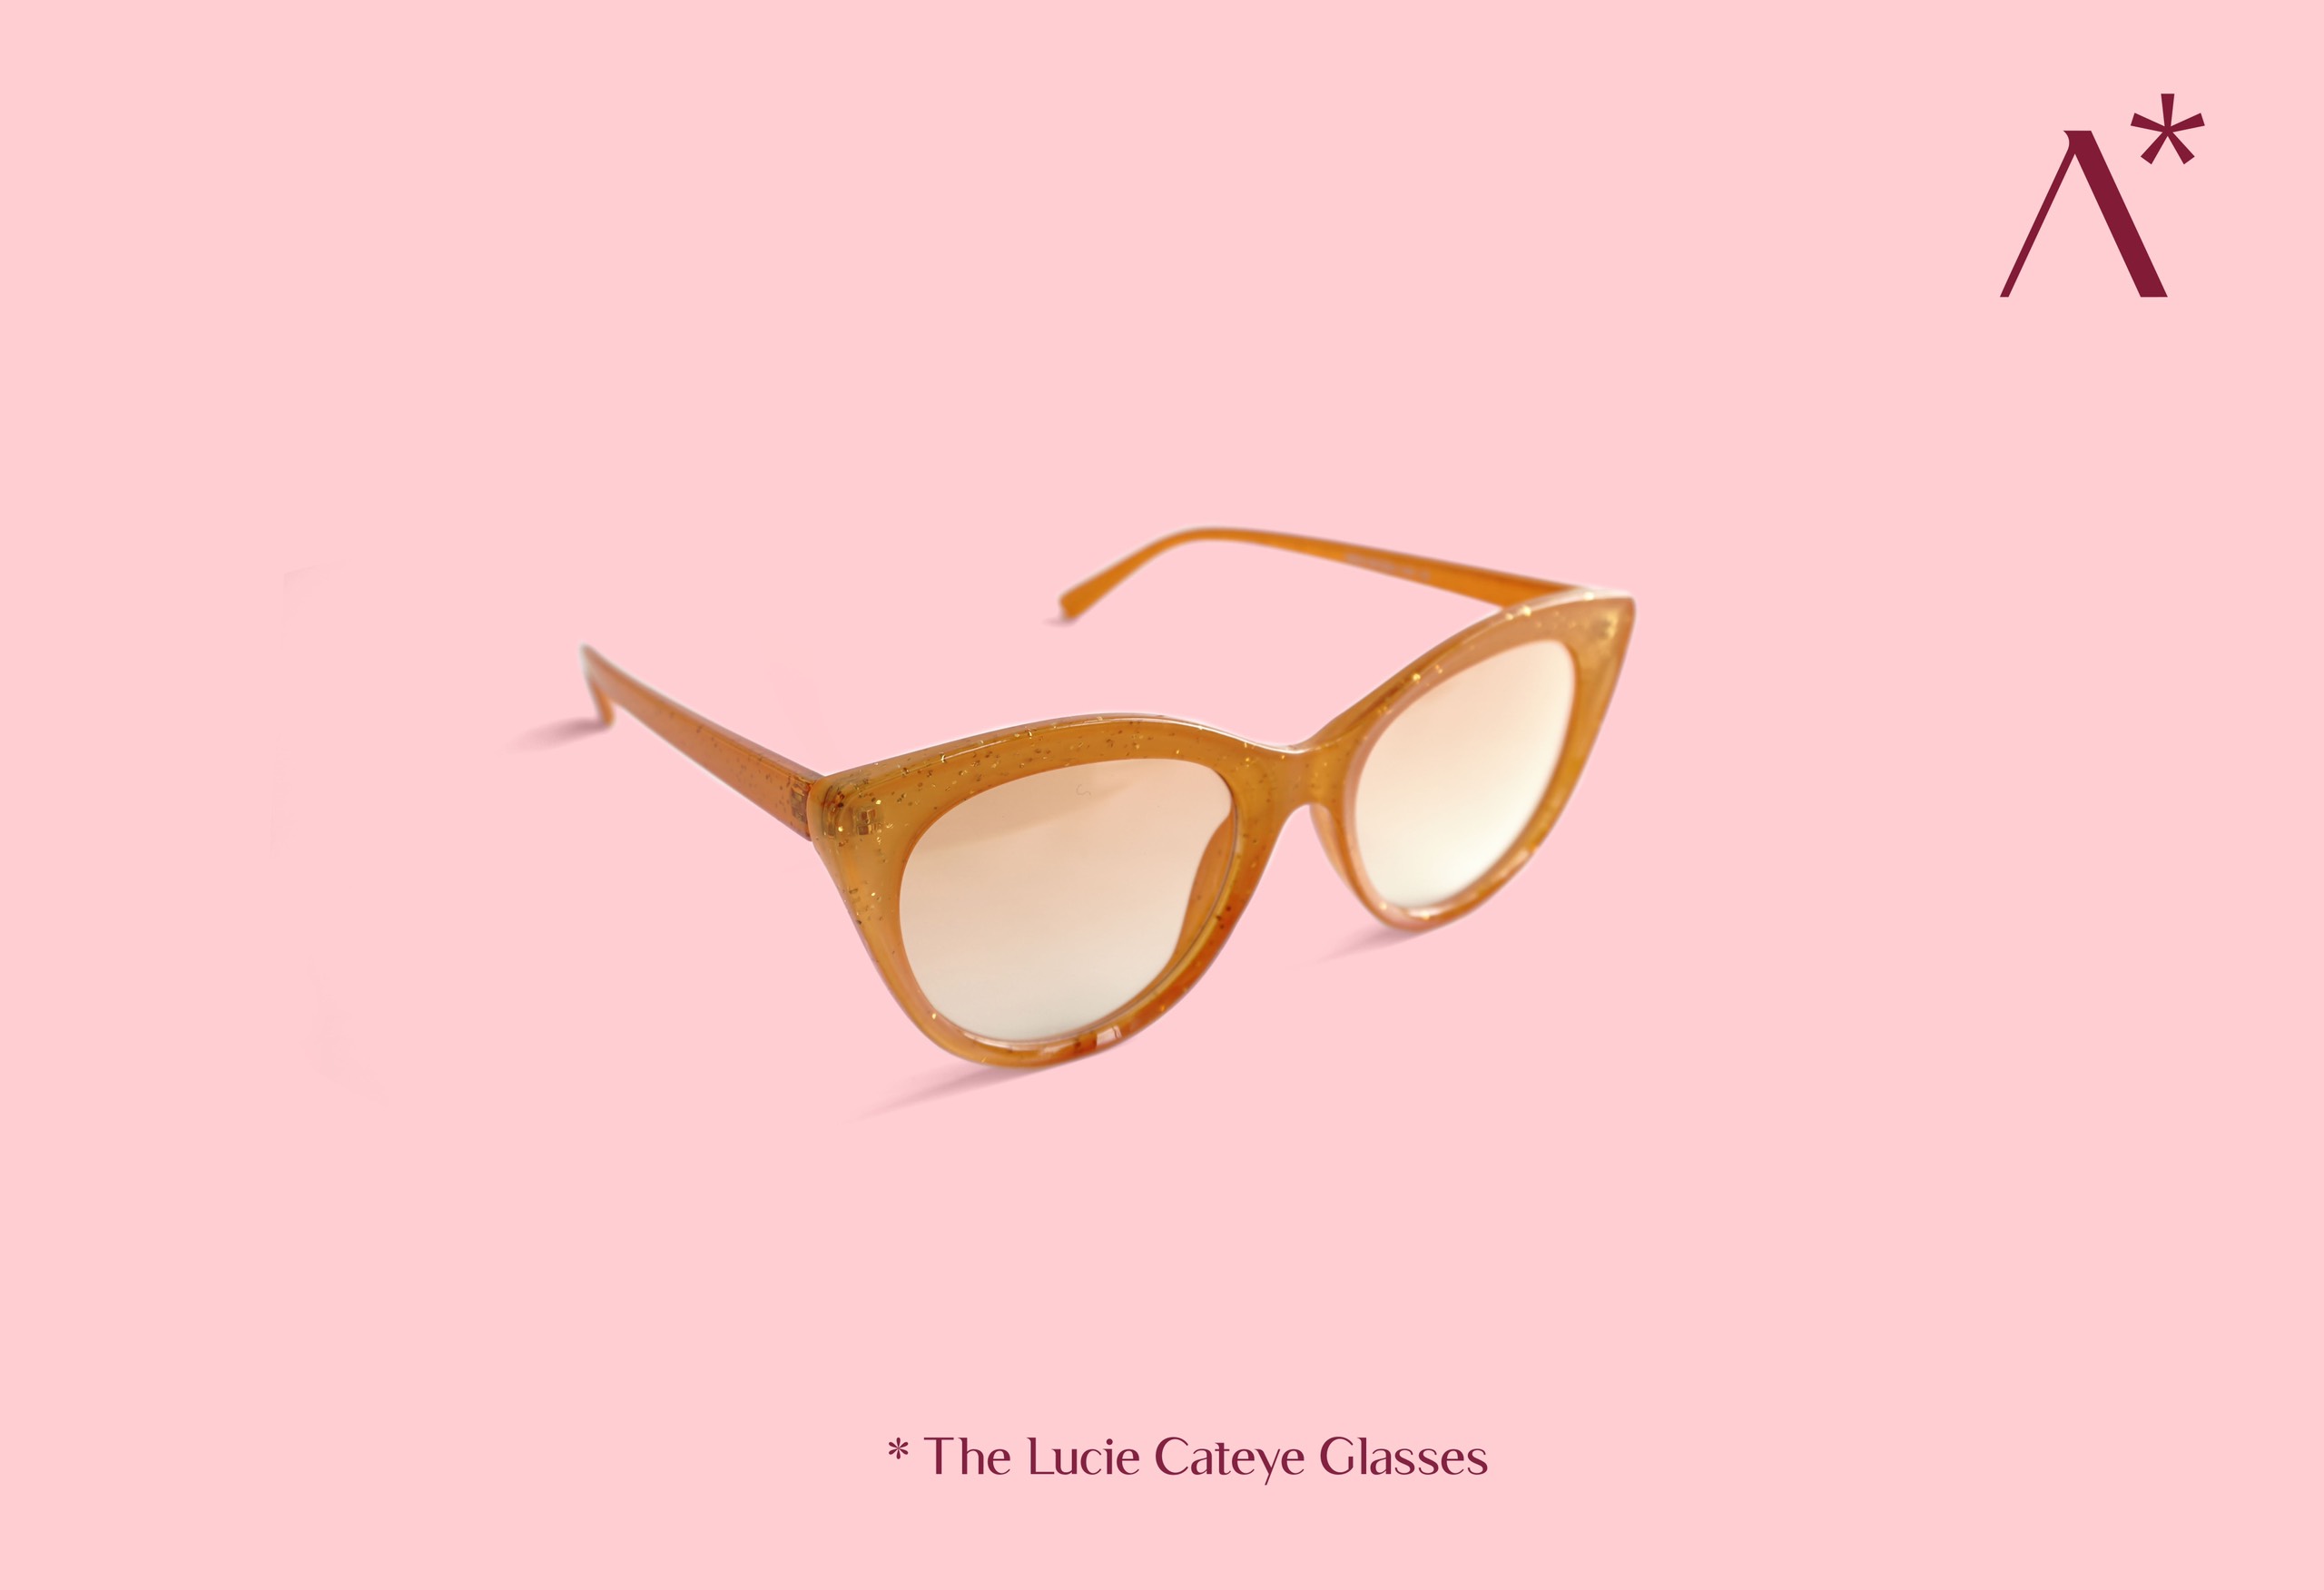 The Lucie Cateye Glasses